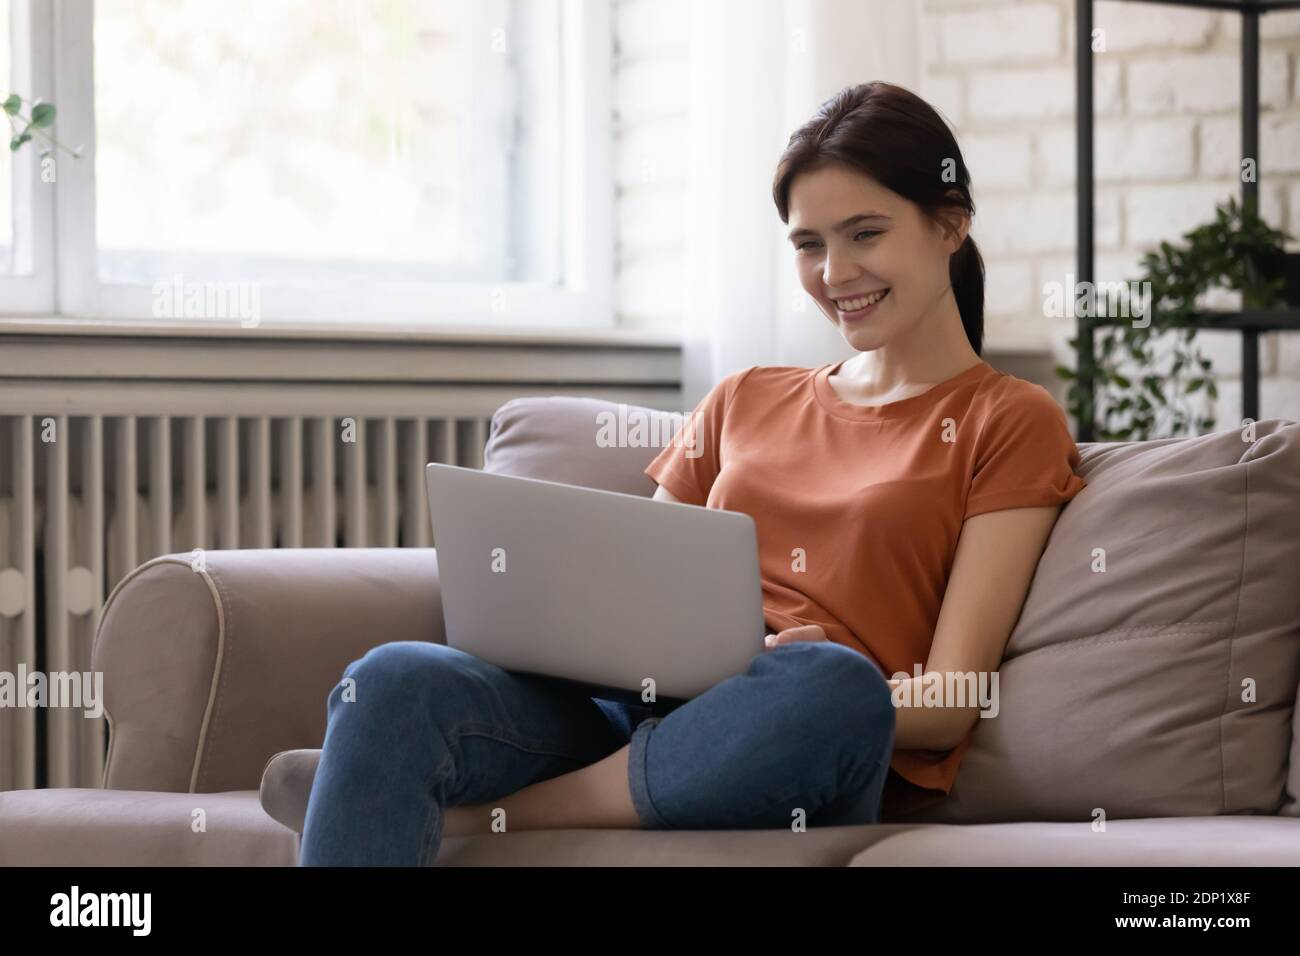 Young woman spending time indoors at quarantine period communicating online Stock Photo